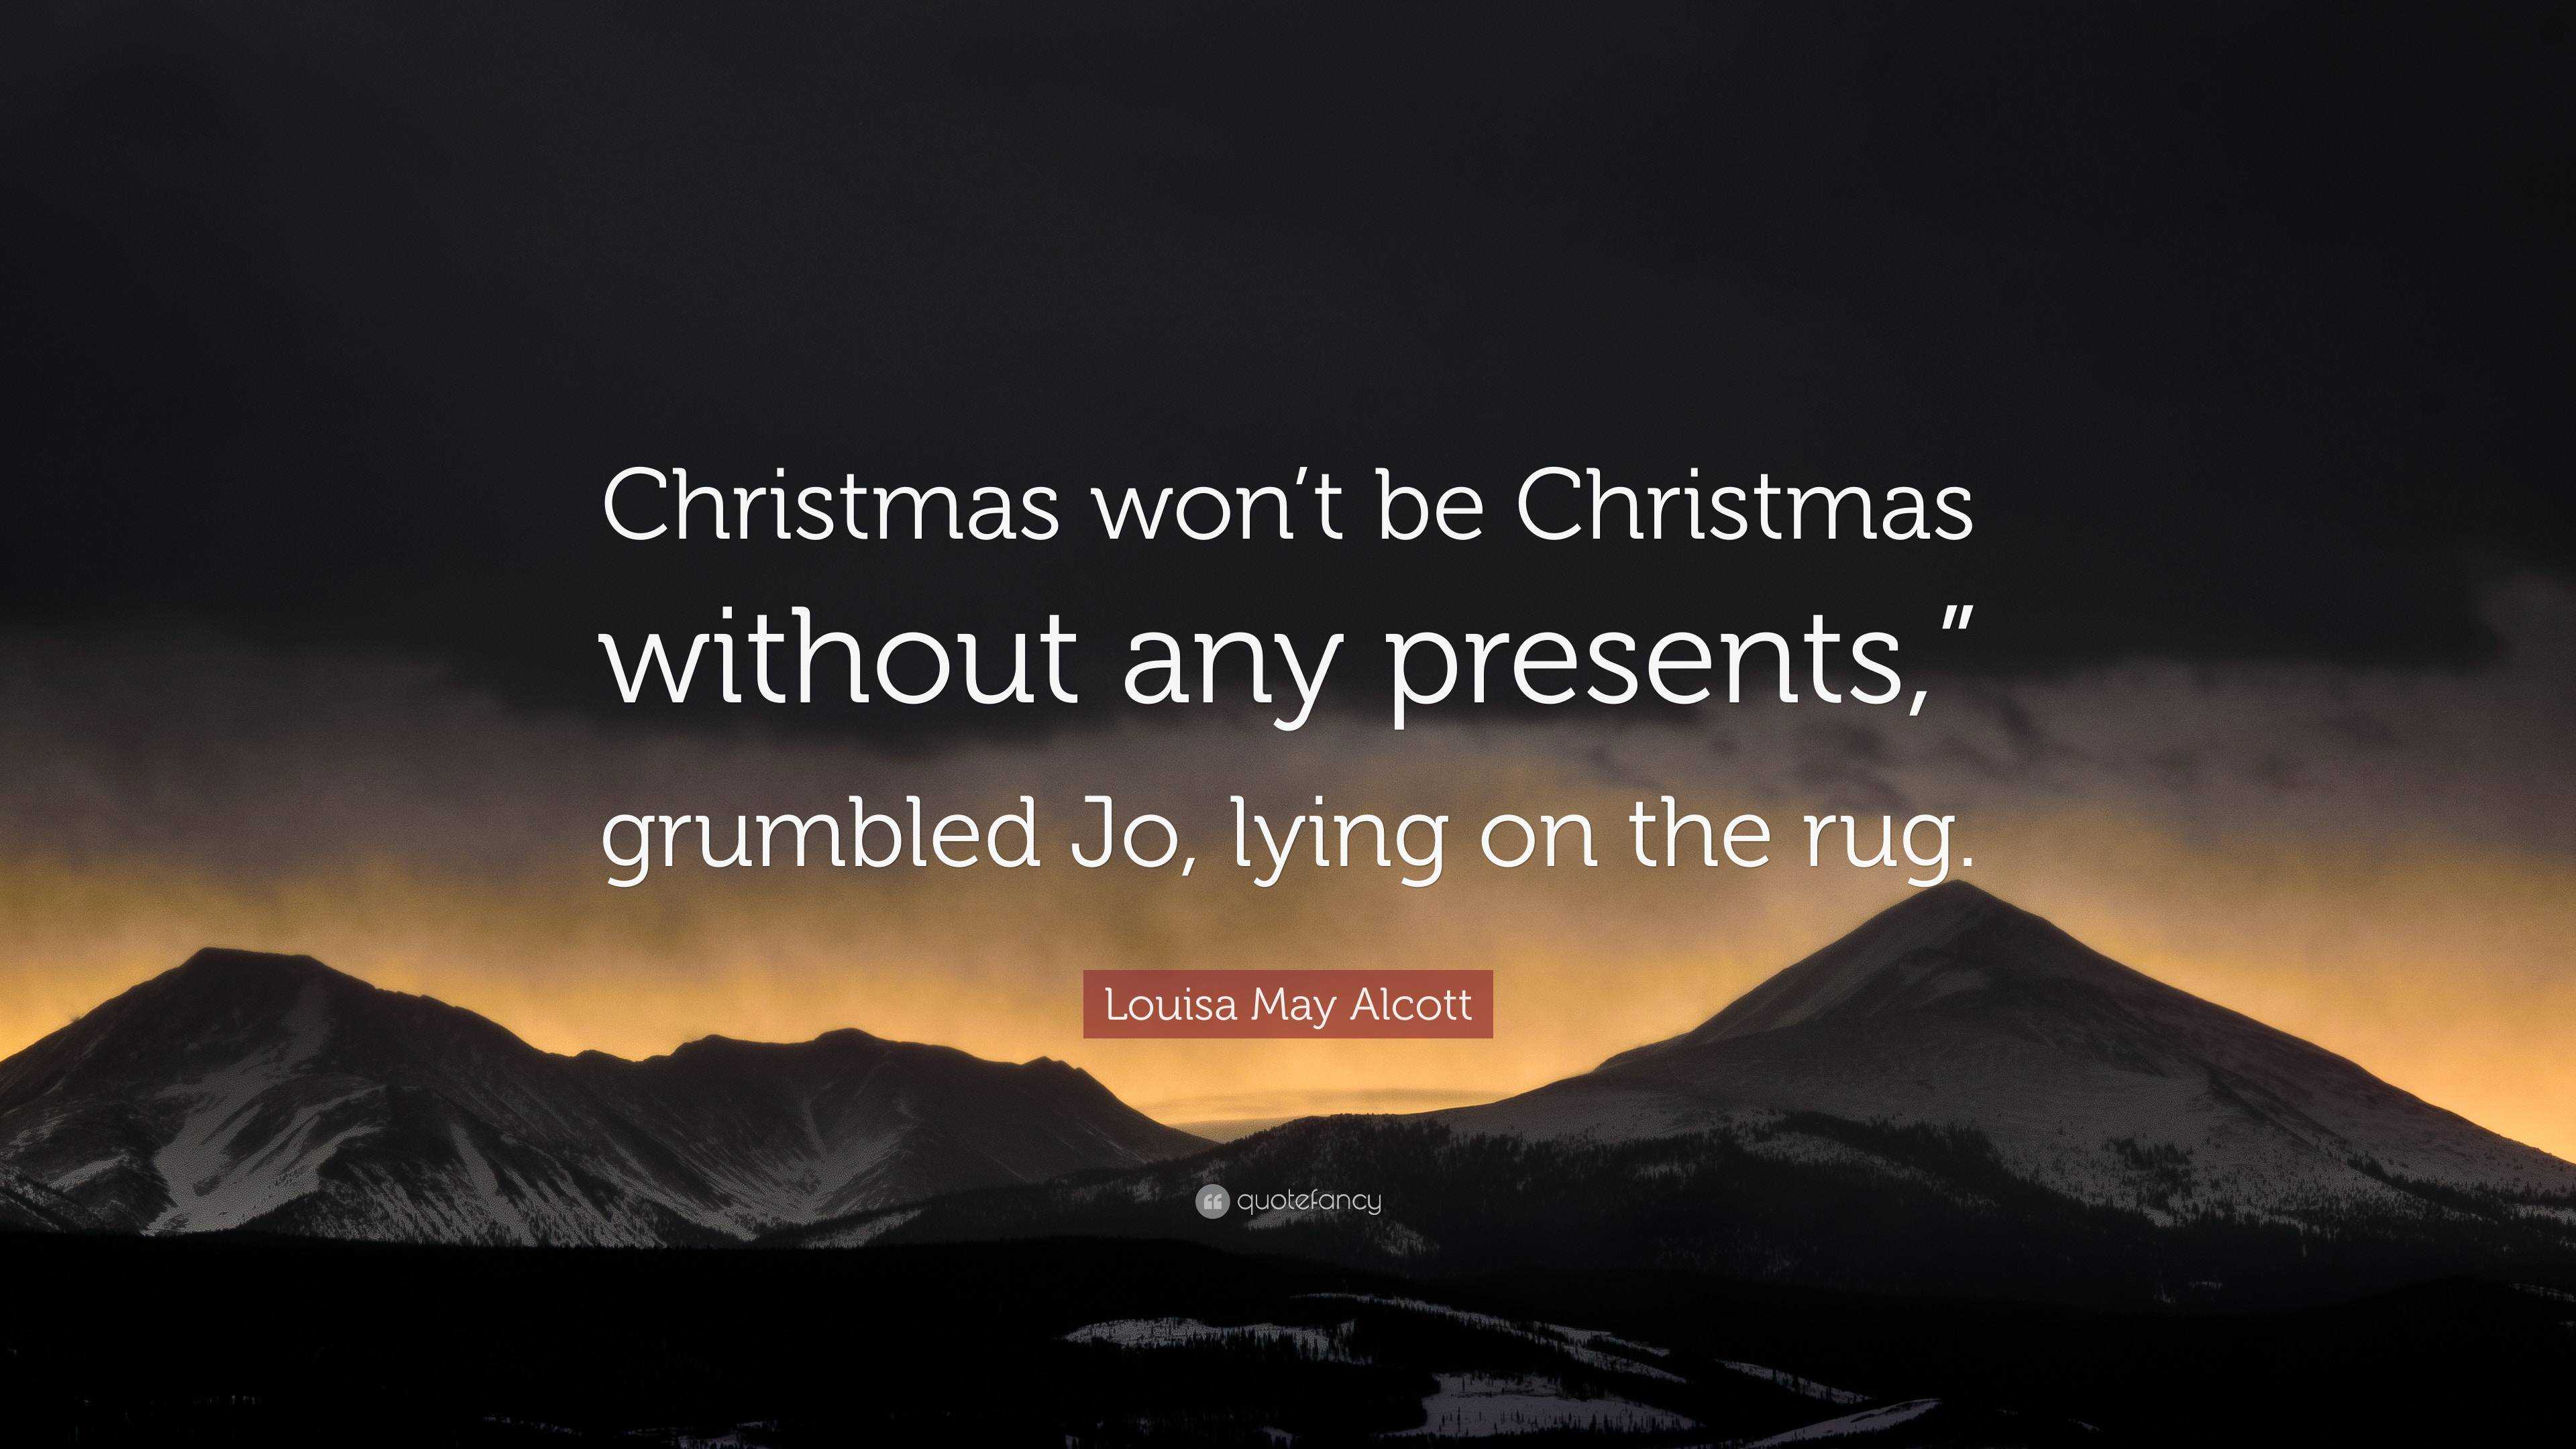 Louisa May Alcott Quote: “Christmas won’t be Christmas without any ...